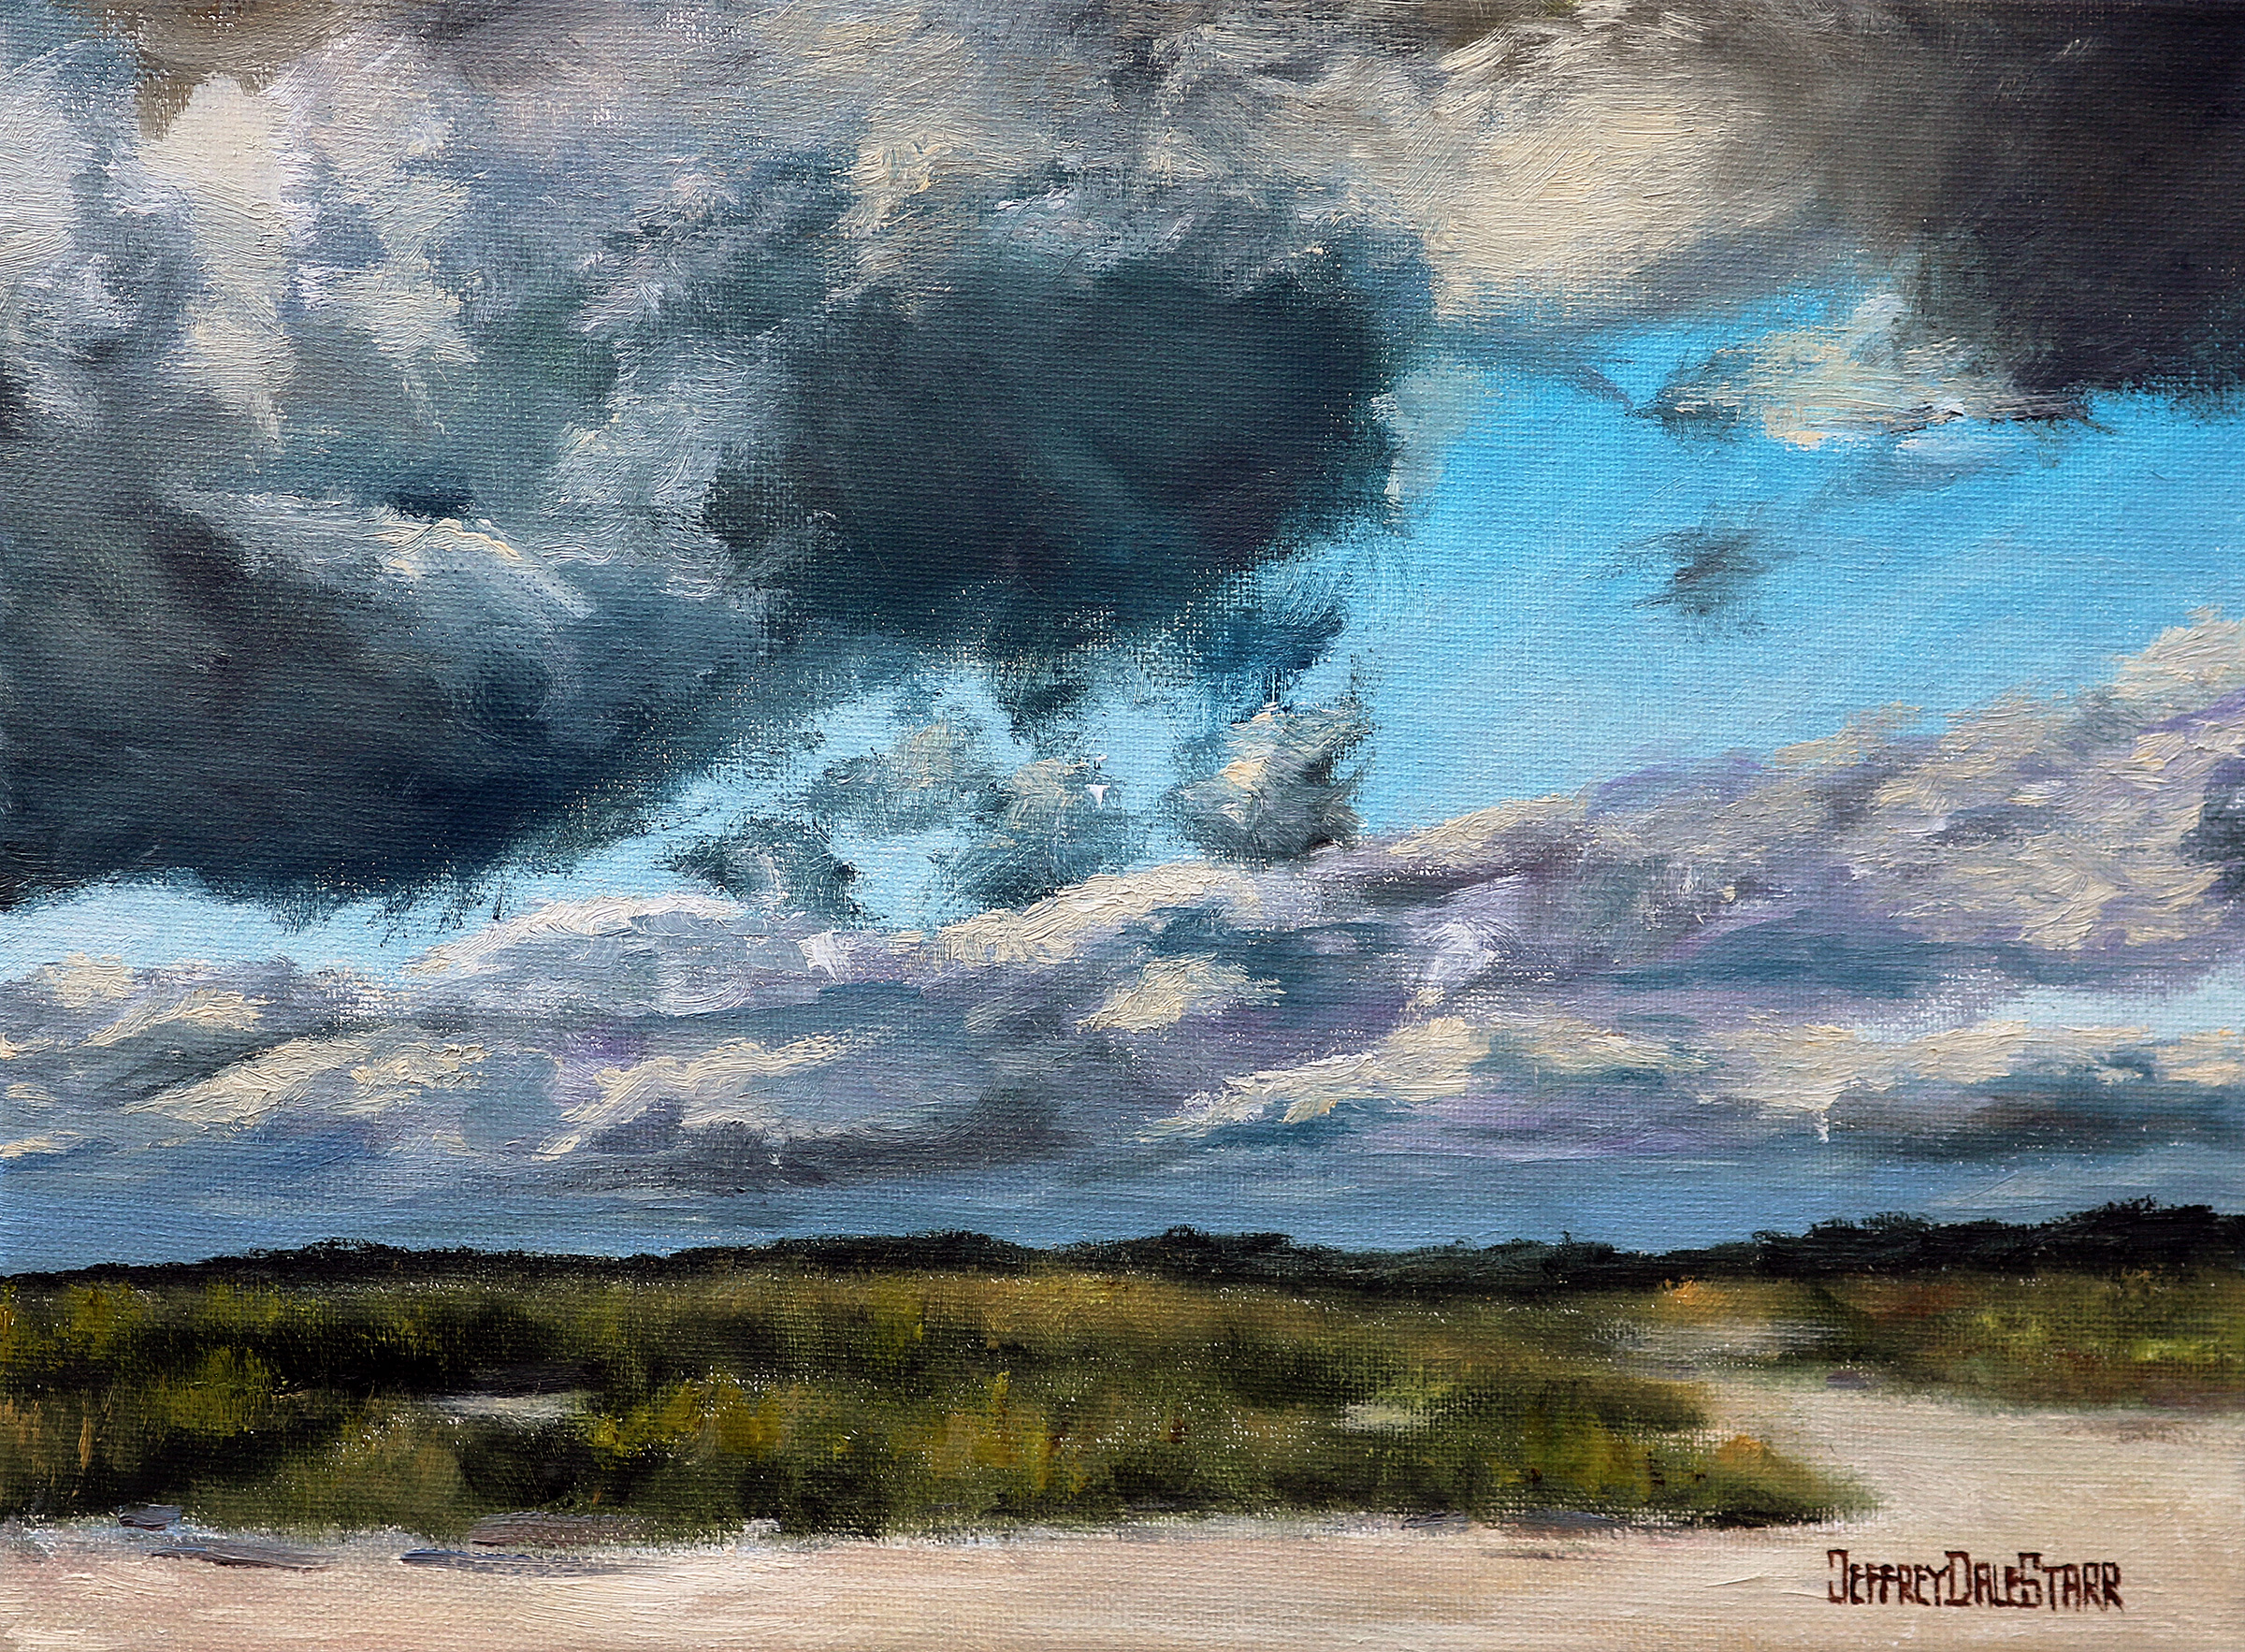 The Storm Rolls Over the Beach by Jeffrey Dale Starr